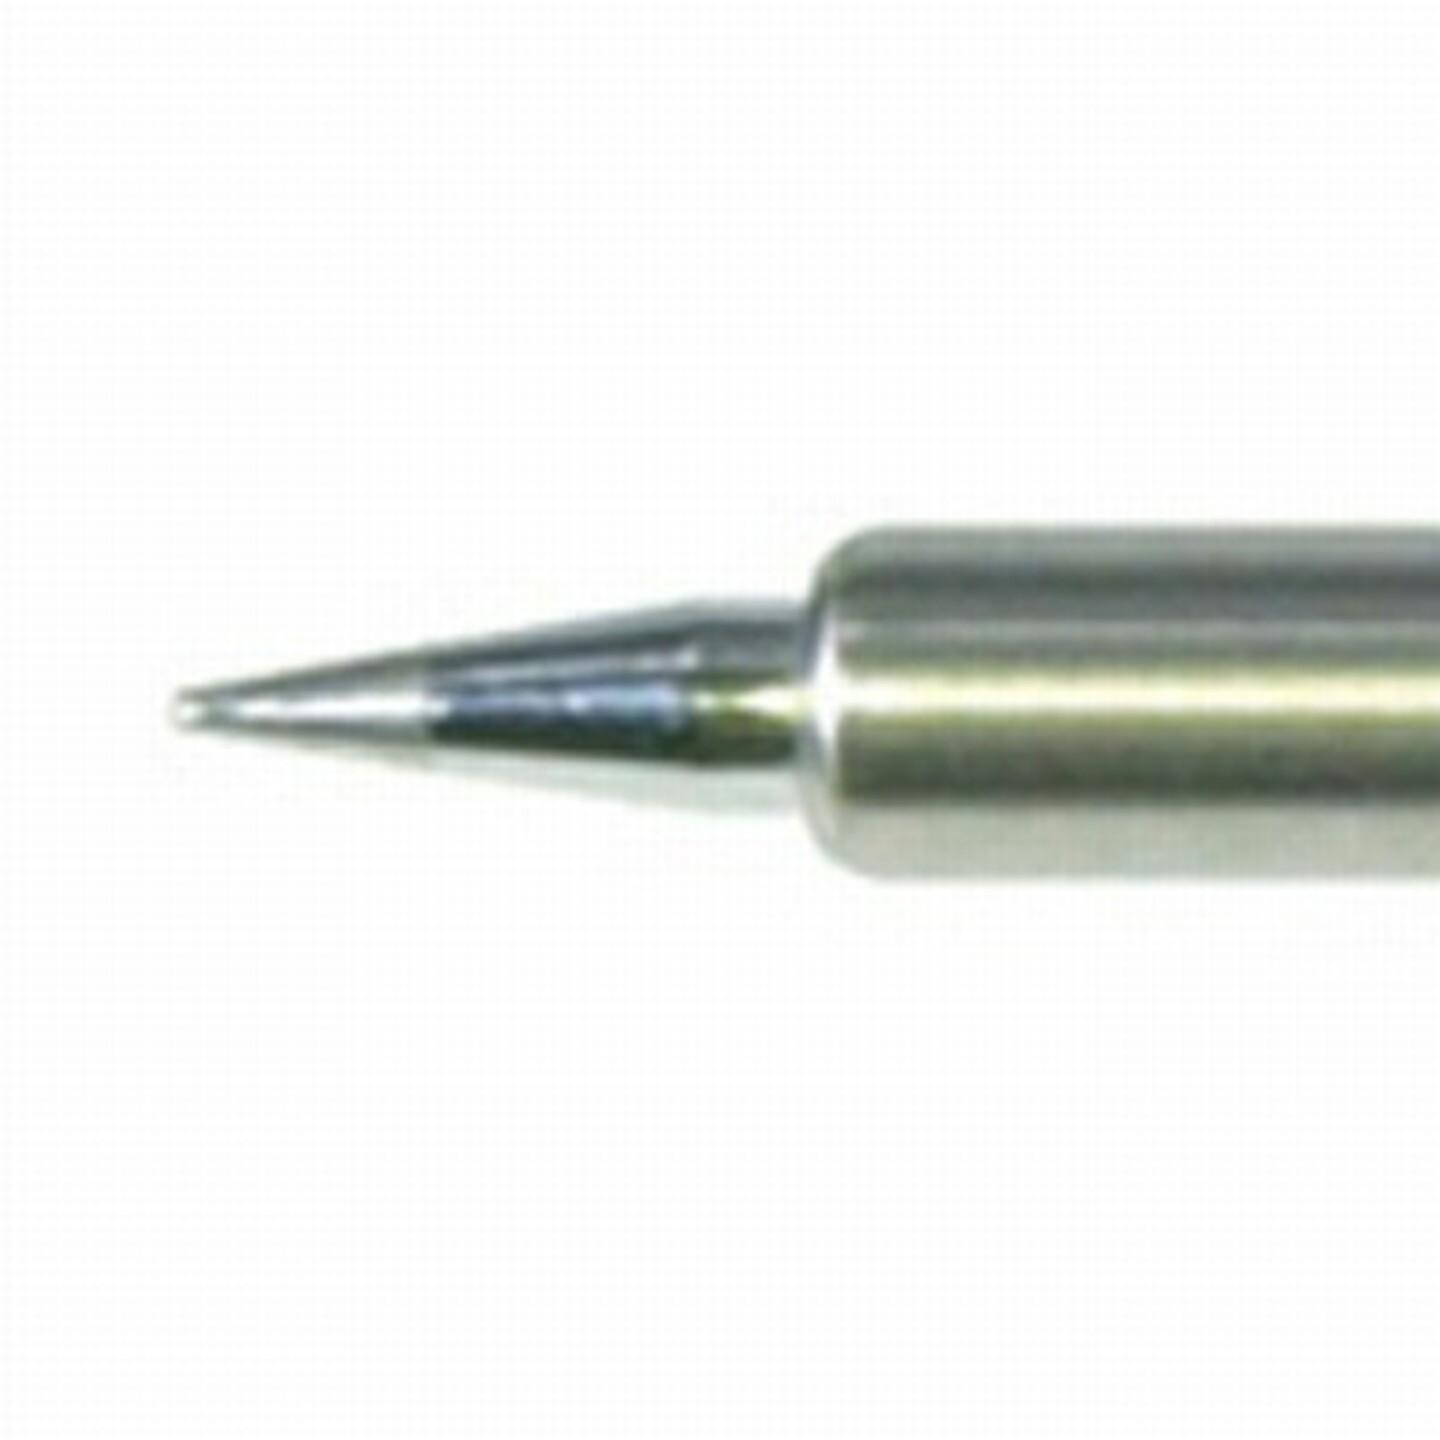 0.5mm Conical tip to suit TS1430 Goot Soldering Iron